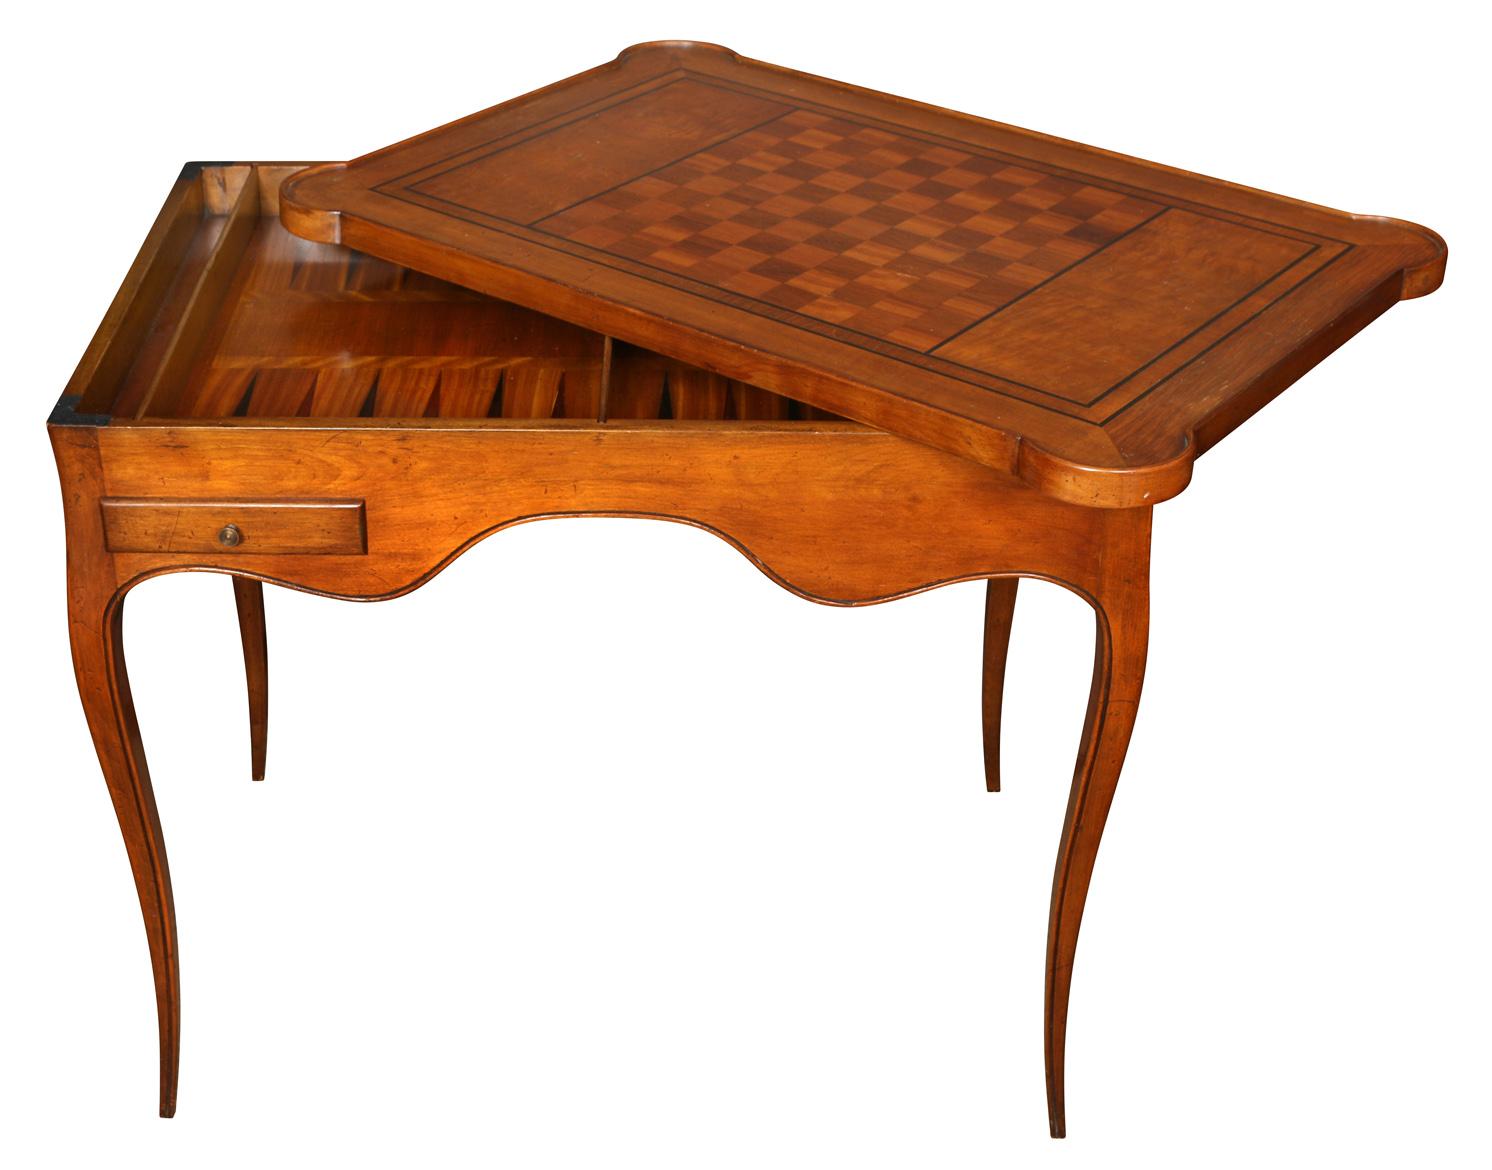 A pretty little Louis XV style fruitwood games table with a reversible top with a chess and checkerboard, opposing a felt lined card surface. The interior features a backgammon board and two side drawers and the table is raised on cabriole legs. 